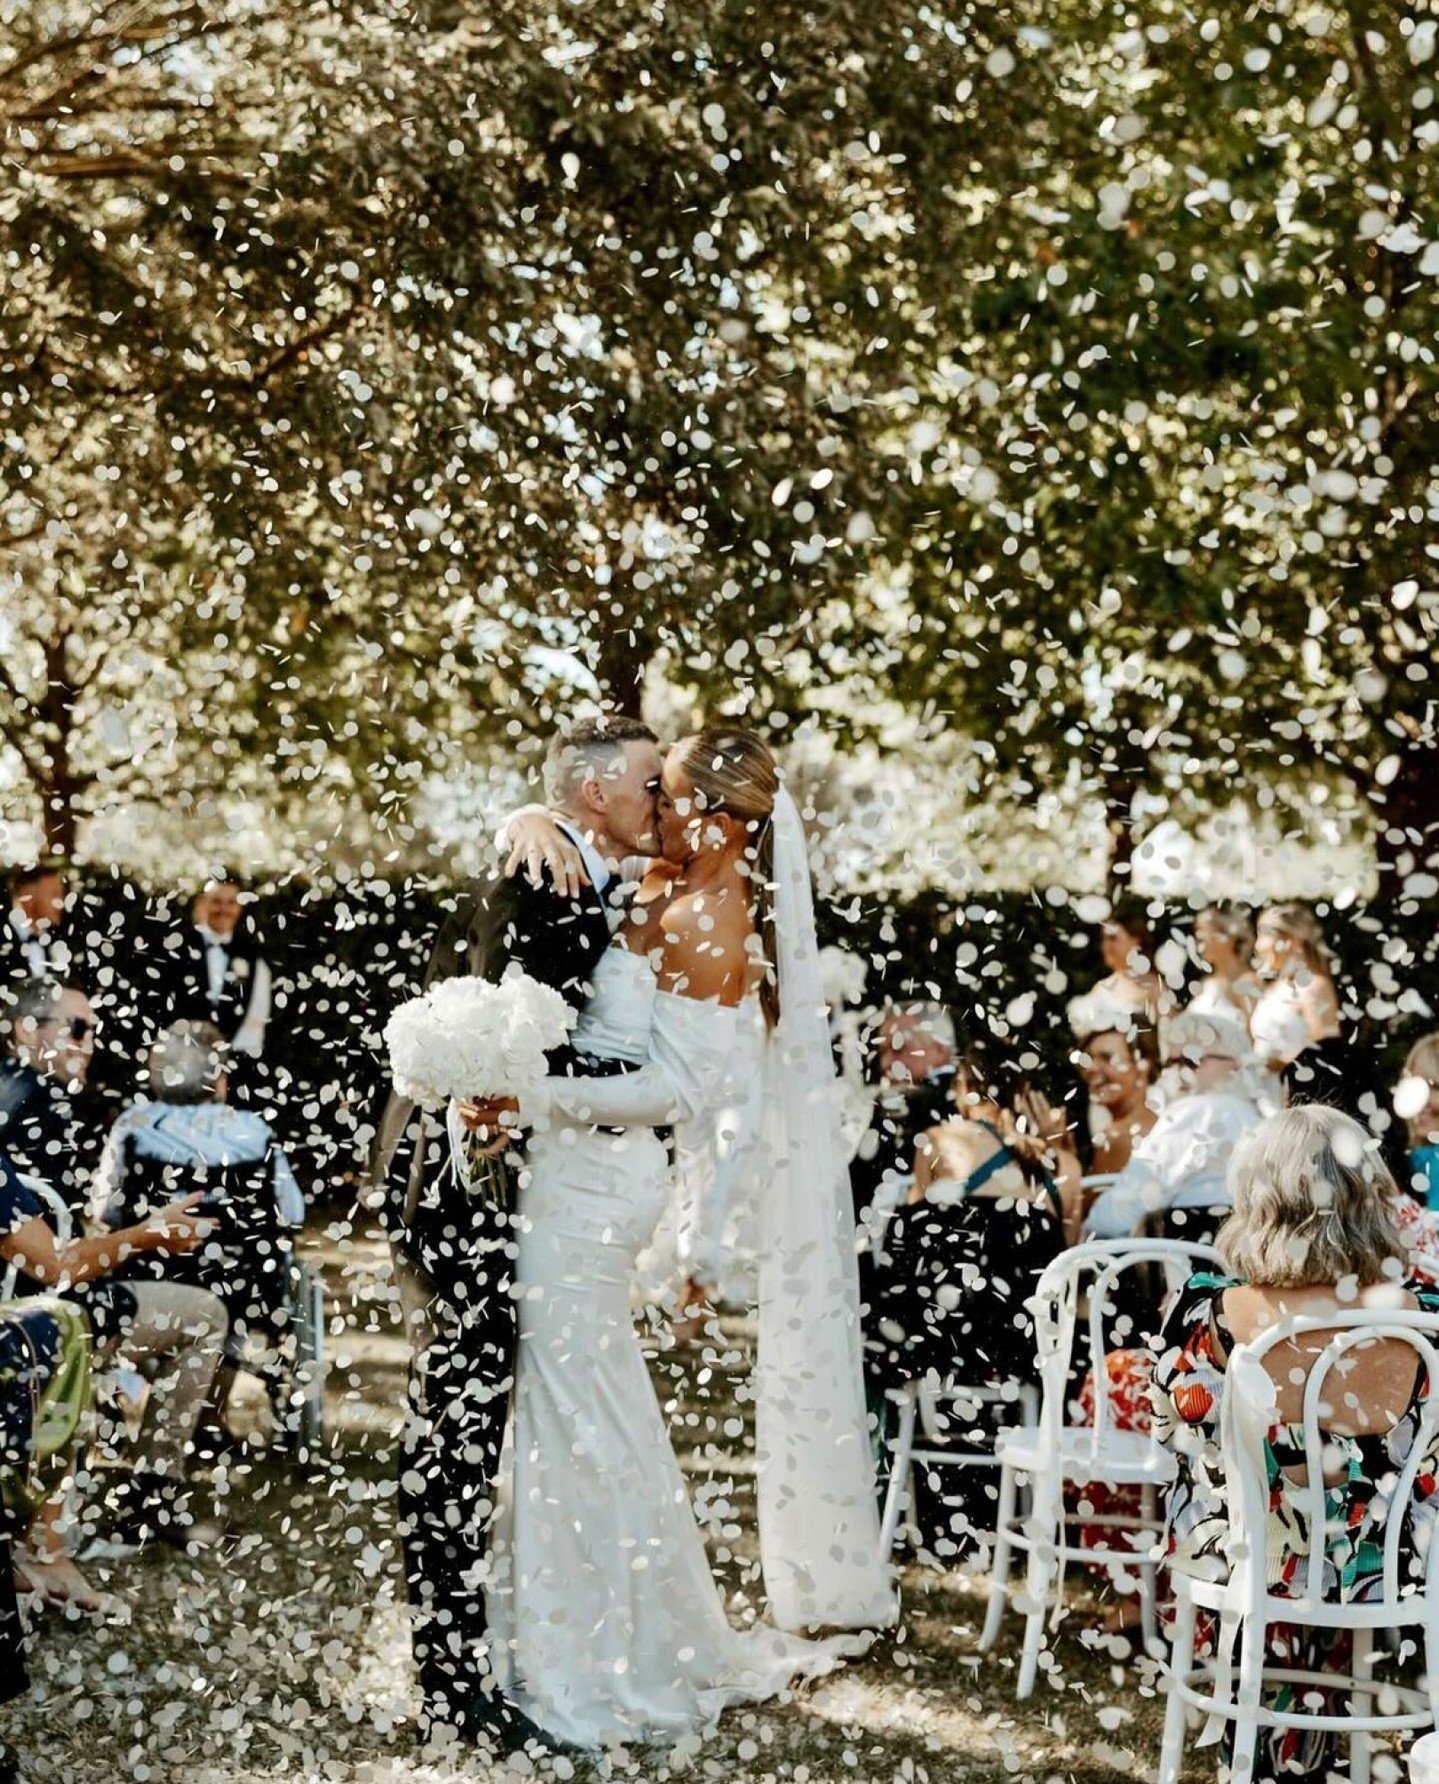 The Thorps nailing the perfect shot!! 

We are all for a confetti toss around here.

Photography @darcybly
Venue @lancemoreevents
Blooms @therealfloristalbury
Confetti Cannons @thewholebride
Furniture Hire @bangeventco